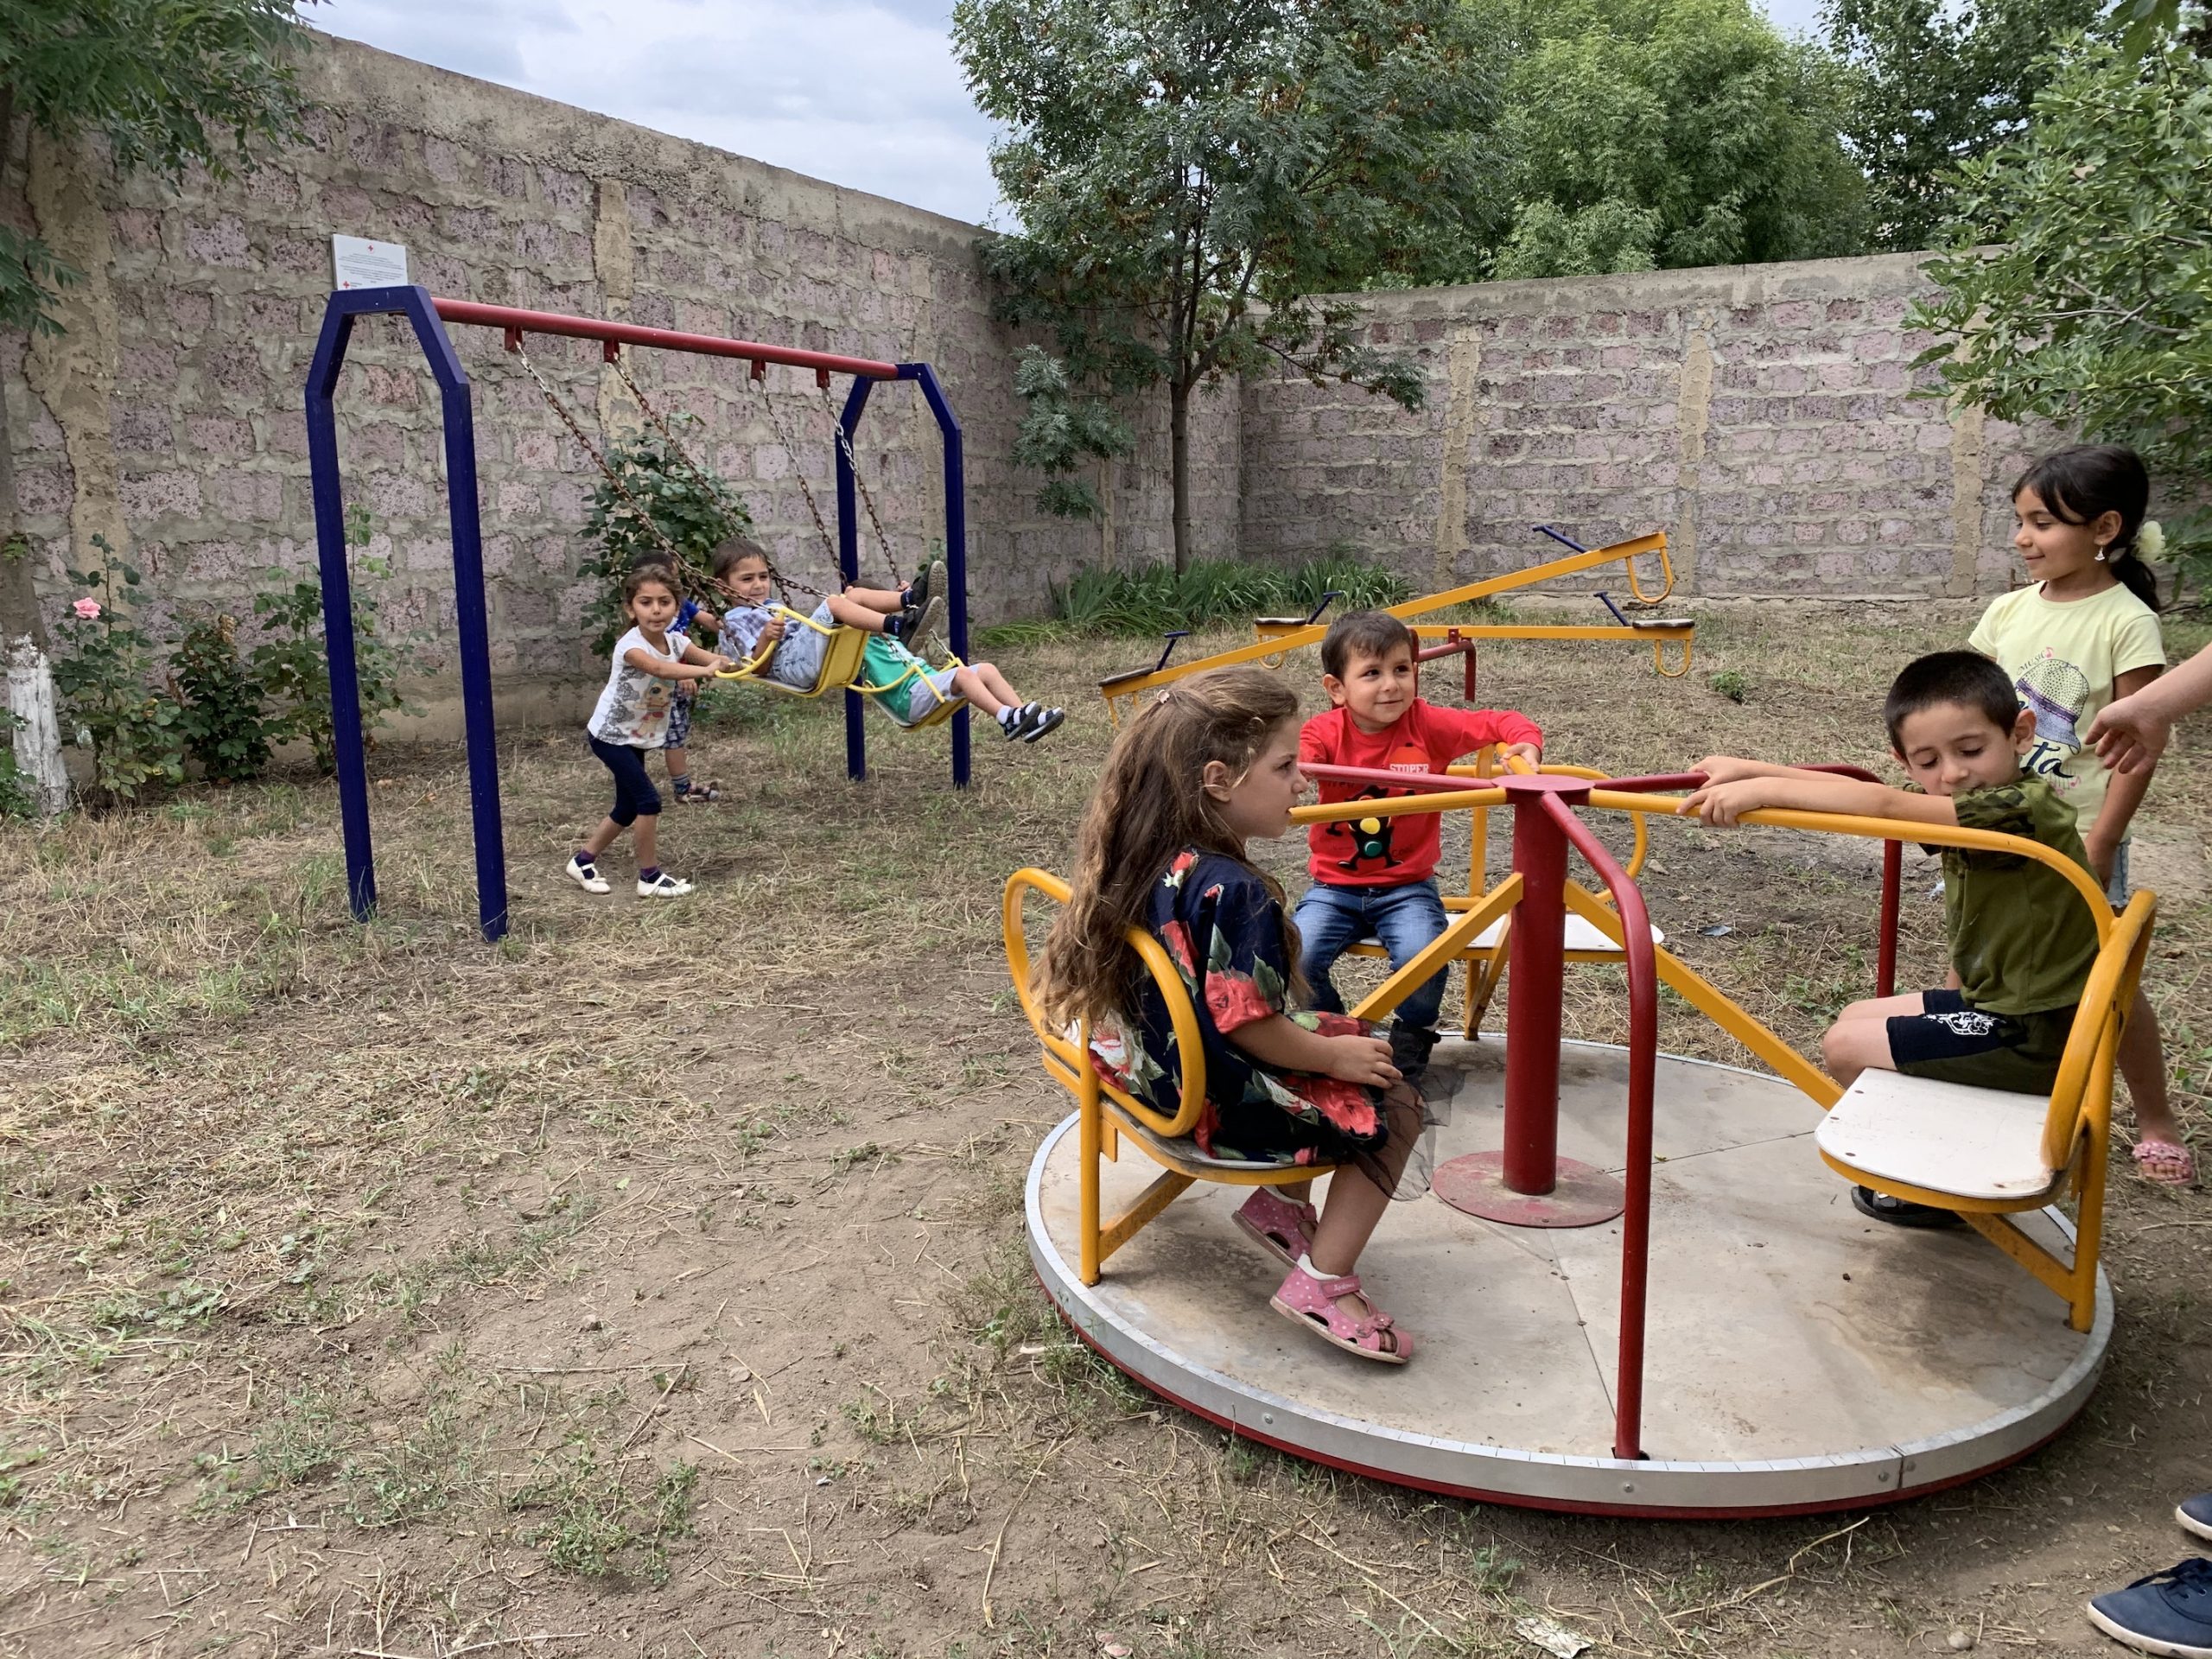 Playing peacefully at the Aygepar Kindergarten playground